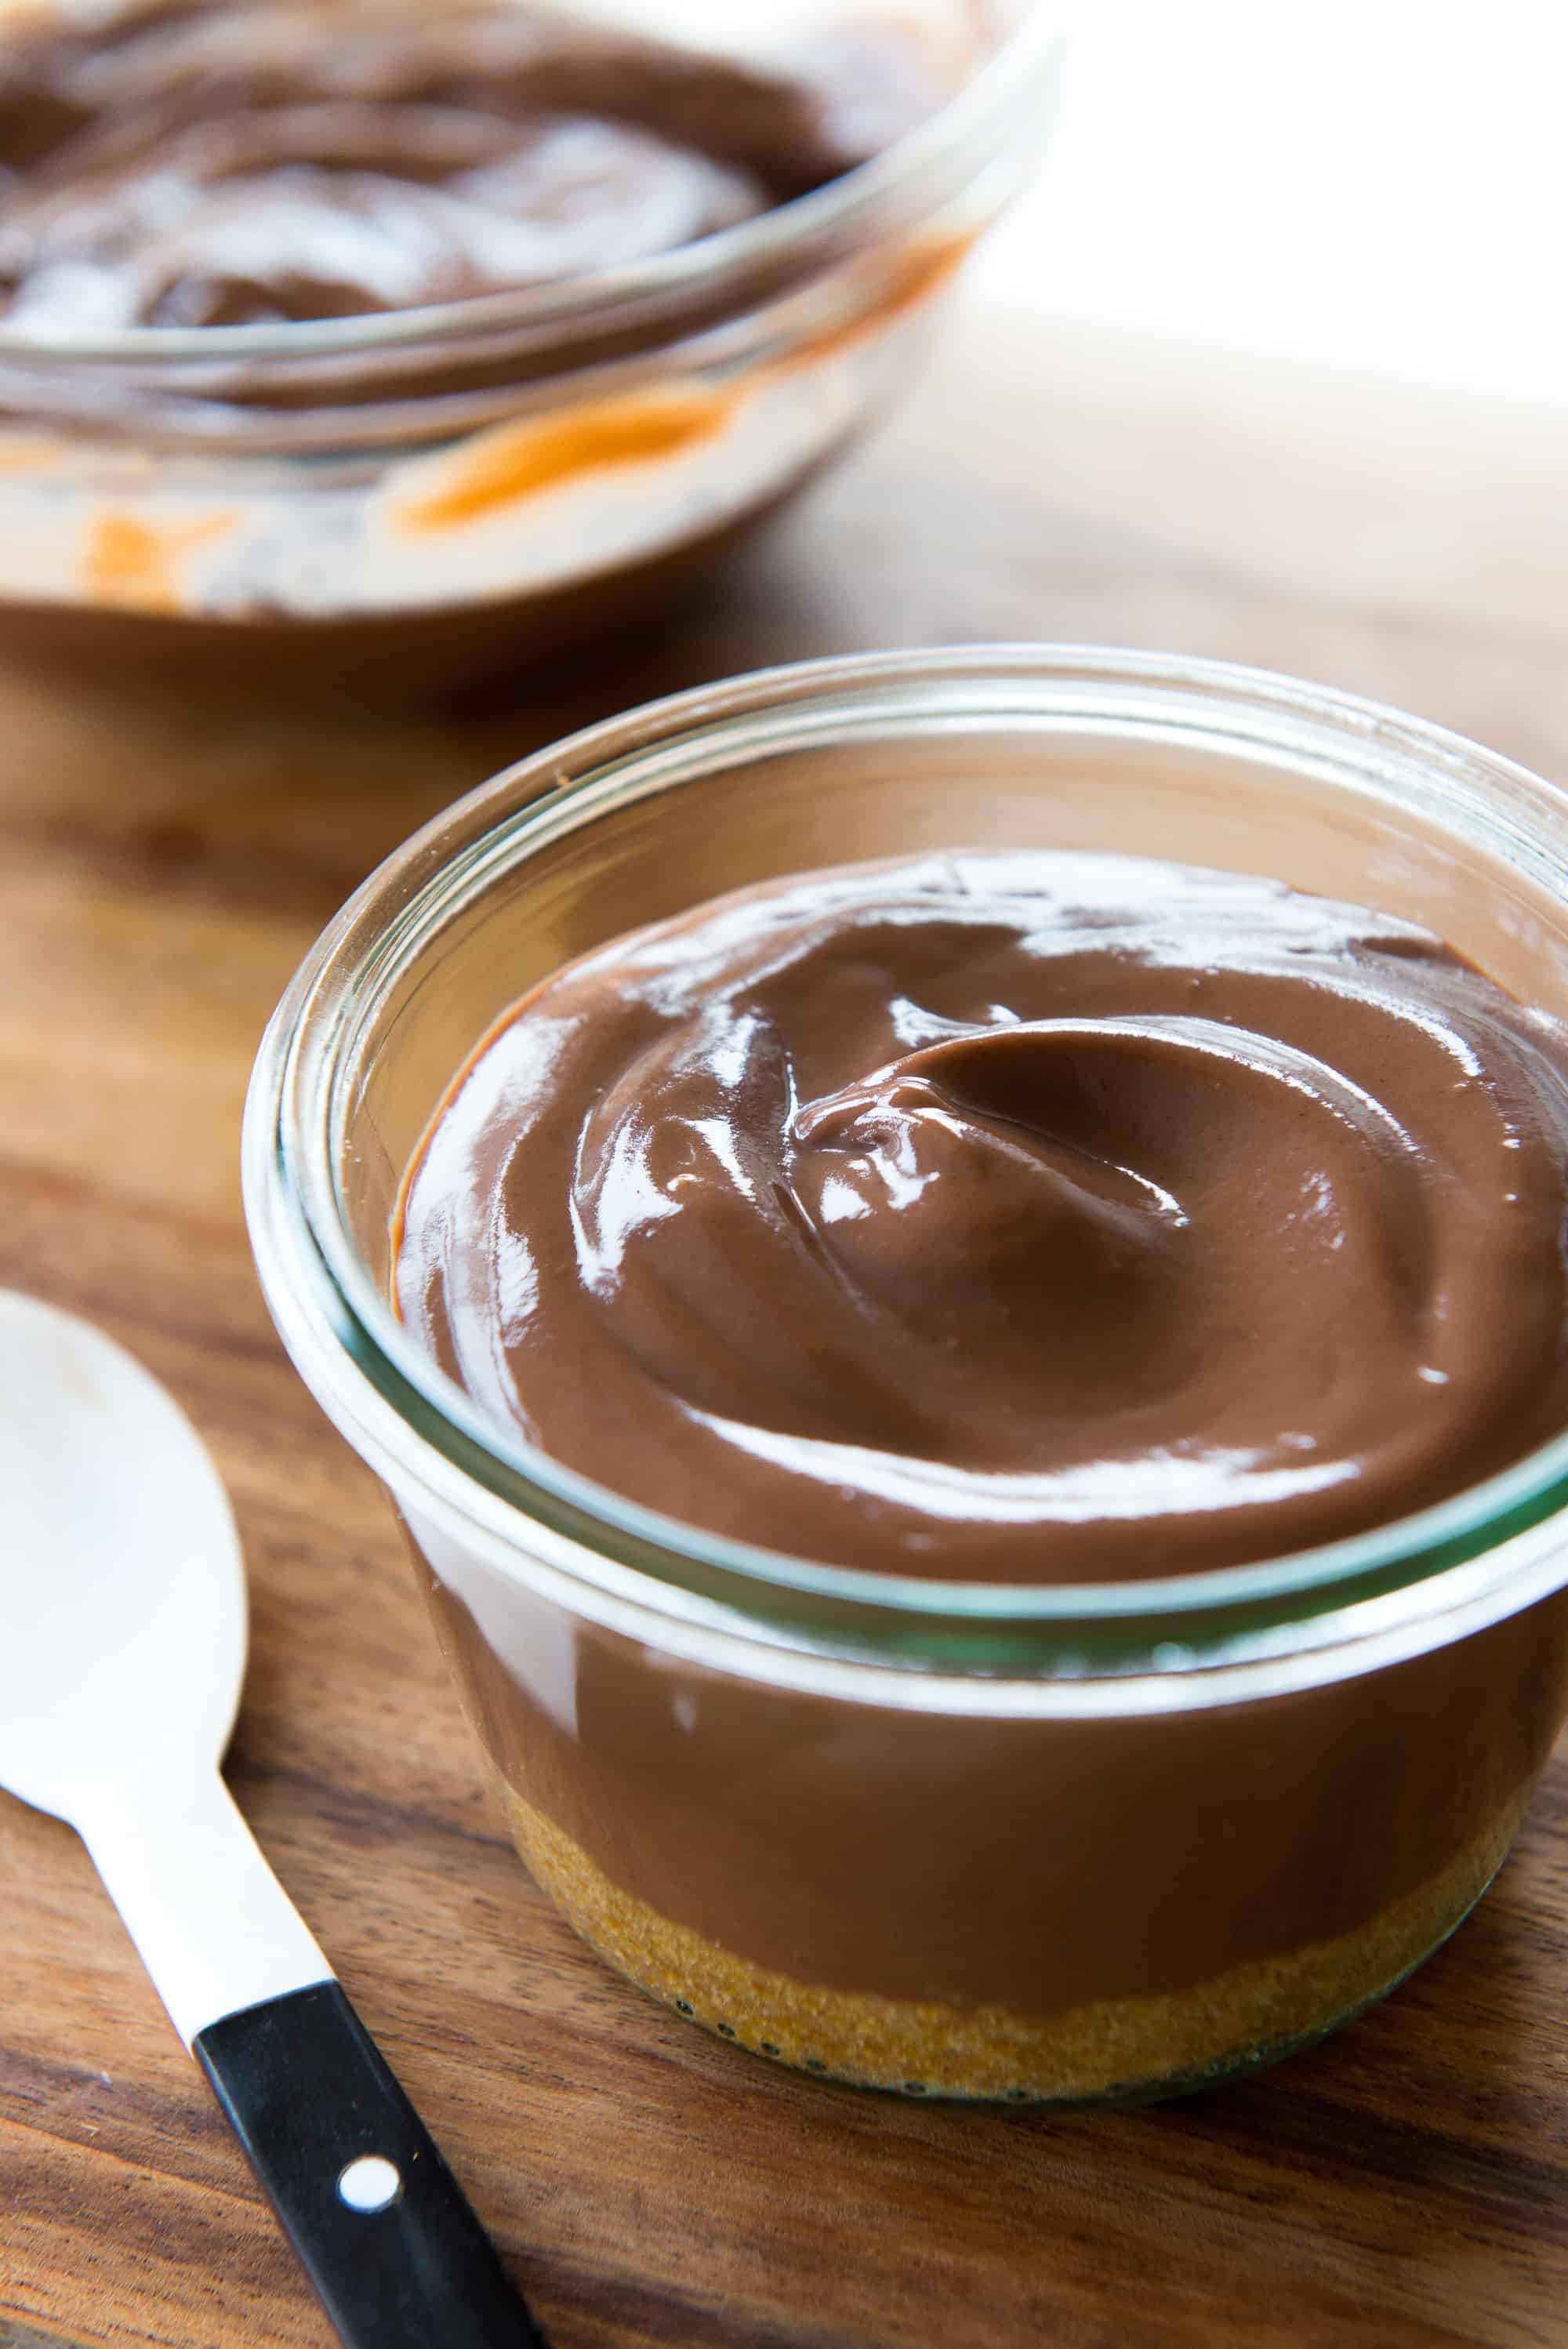 Mouth watering chocolate pudding